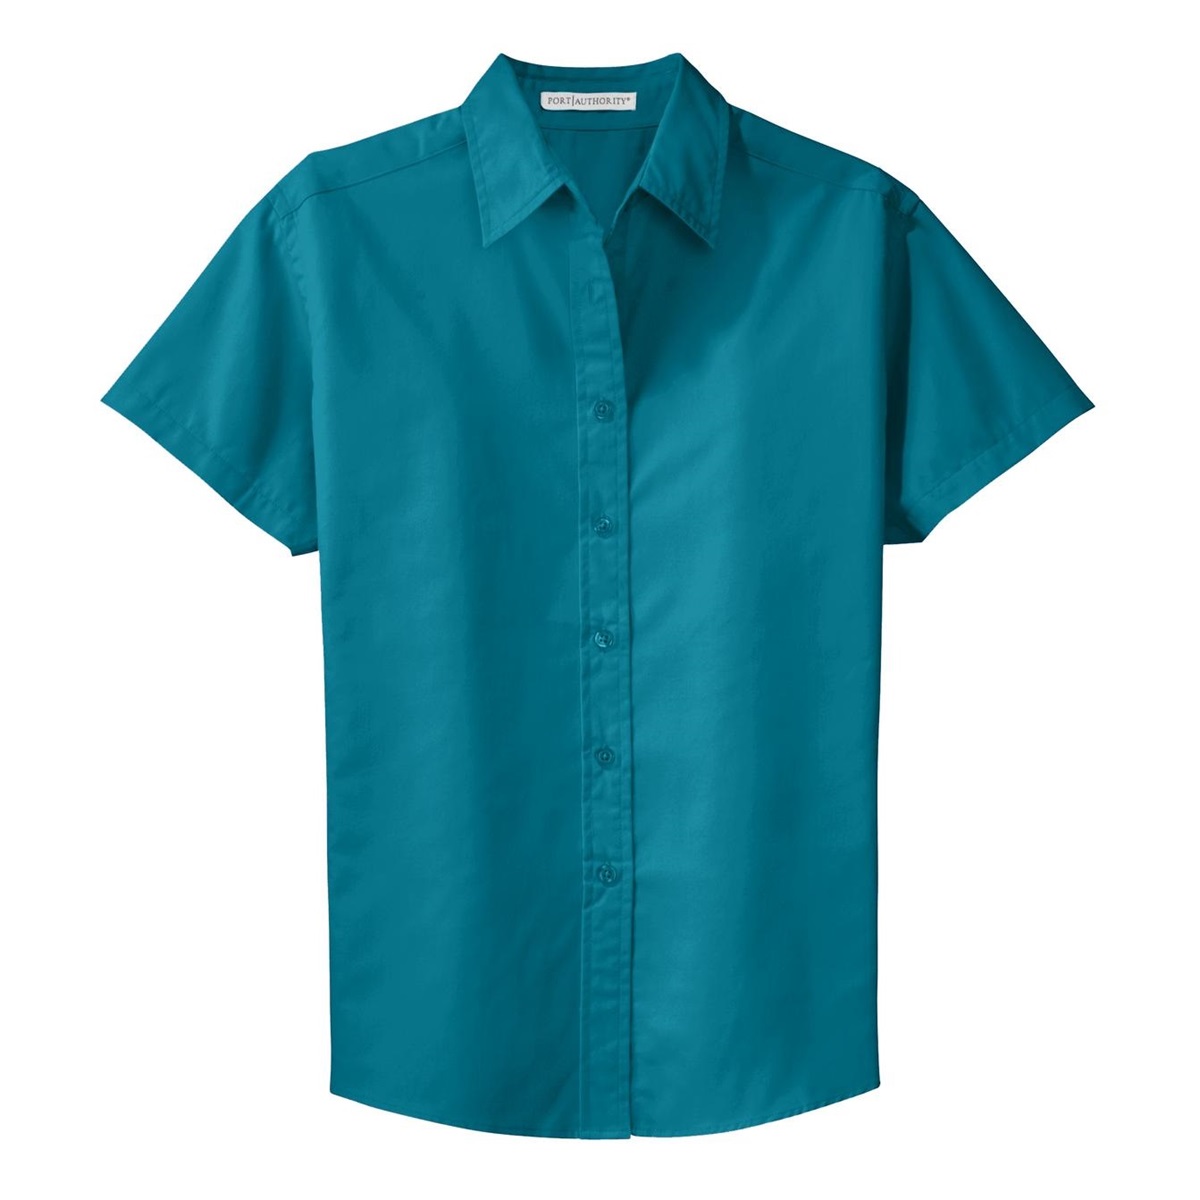 Port Authority L508 Ladies Short Sleeve Easy Care Shirt - Teal Green ...